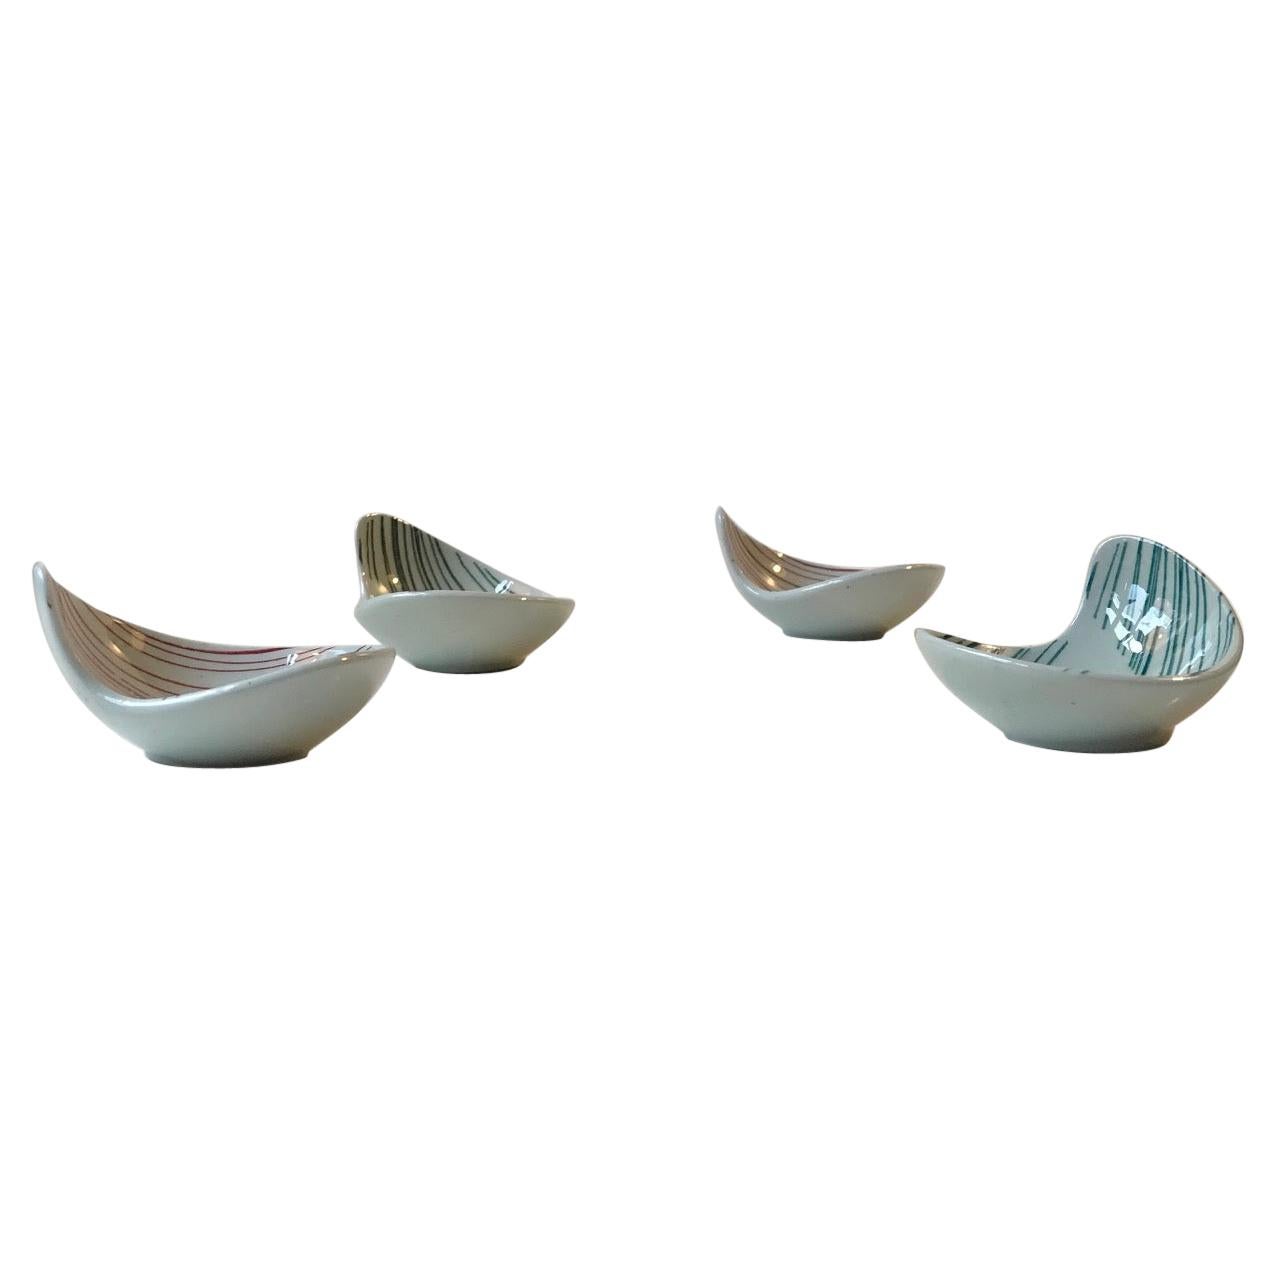 Modernist Miniature's, Kidney Shaped Bowls from Nymolle, Denmark, 1960s For Sale